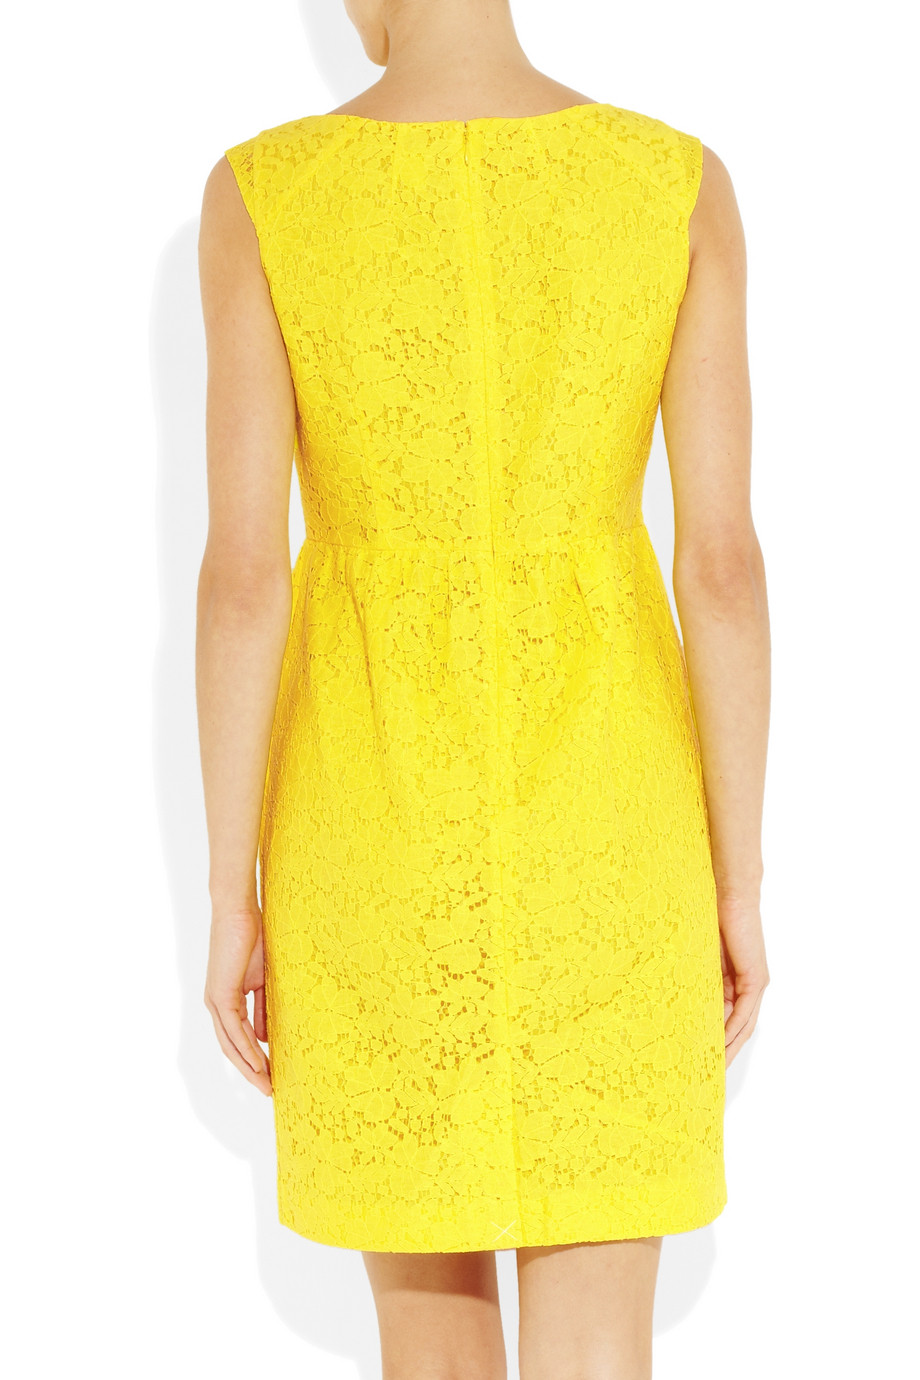 J.Crew Lucille Cotton blend Lace Dress in Yellow | Lyst